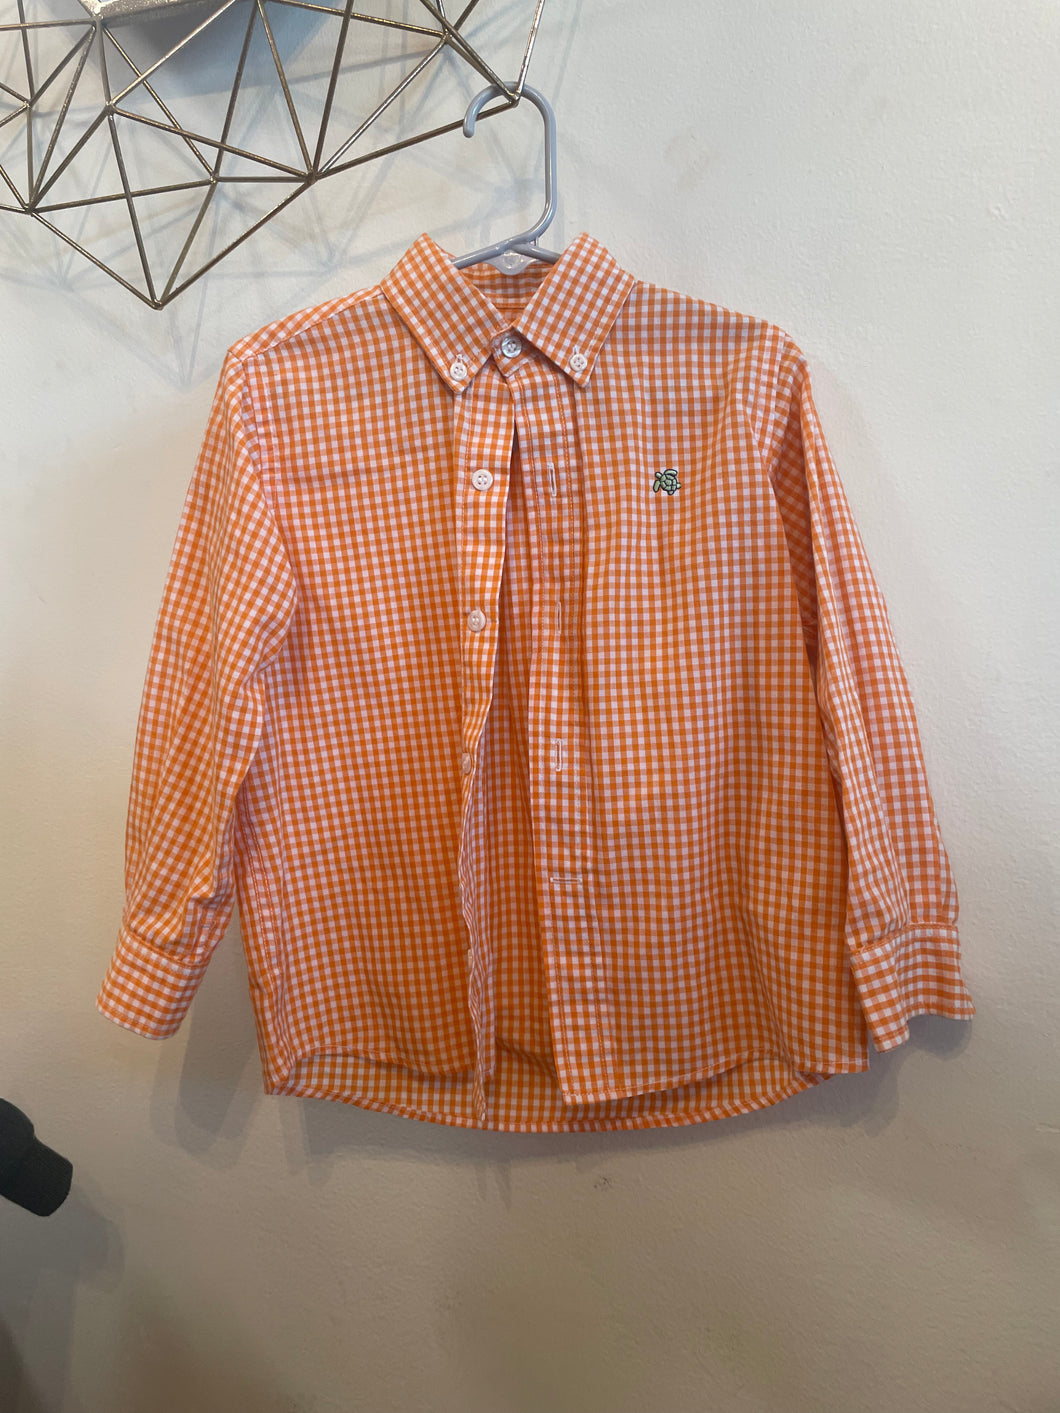 J. Bailey 3t button up